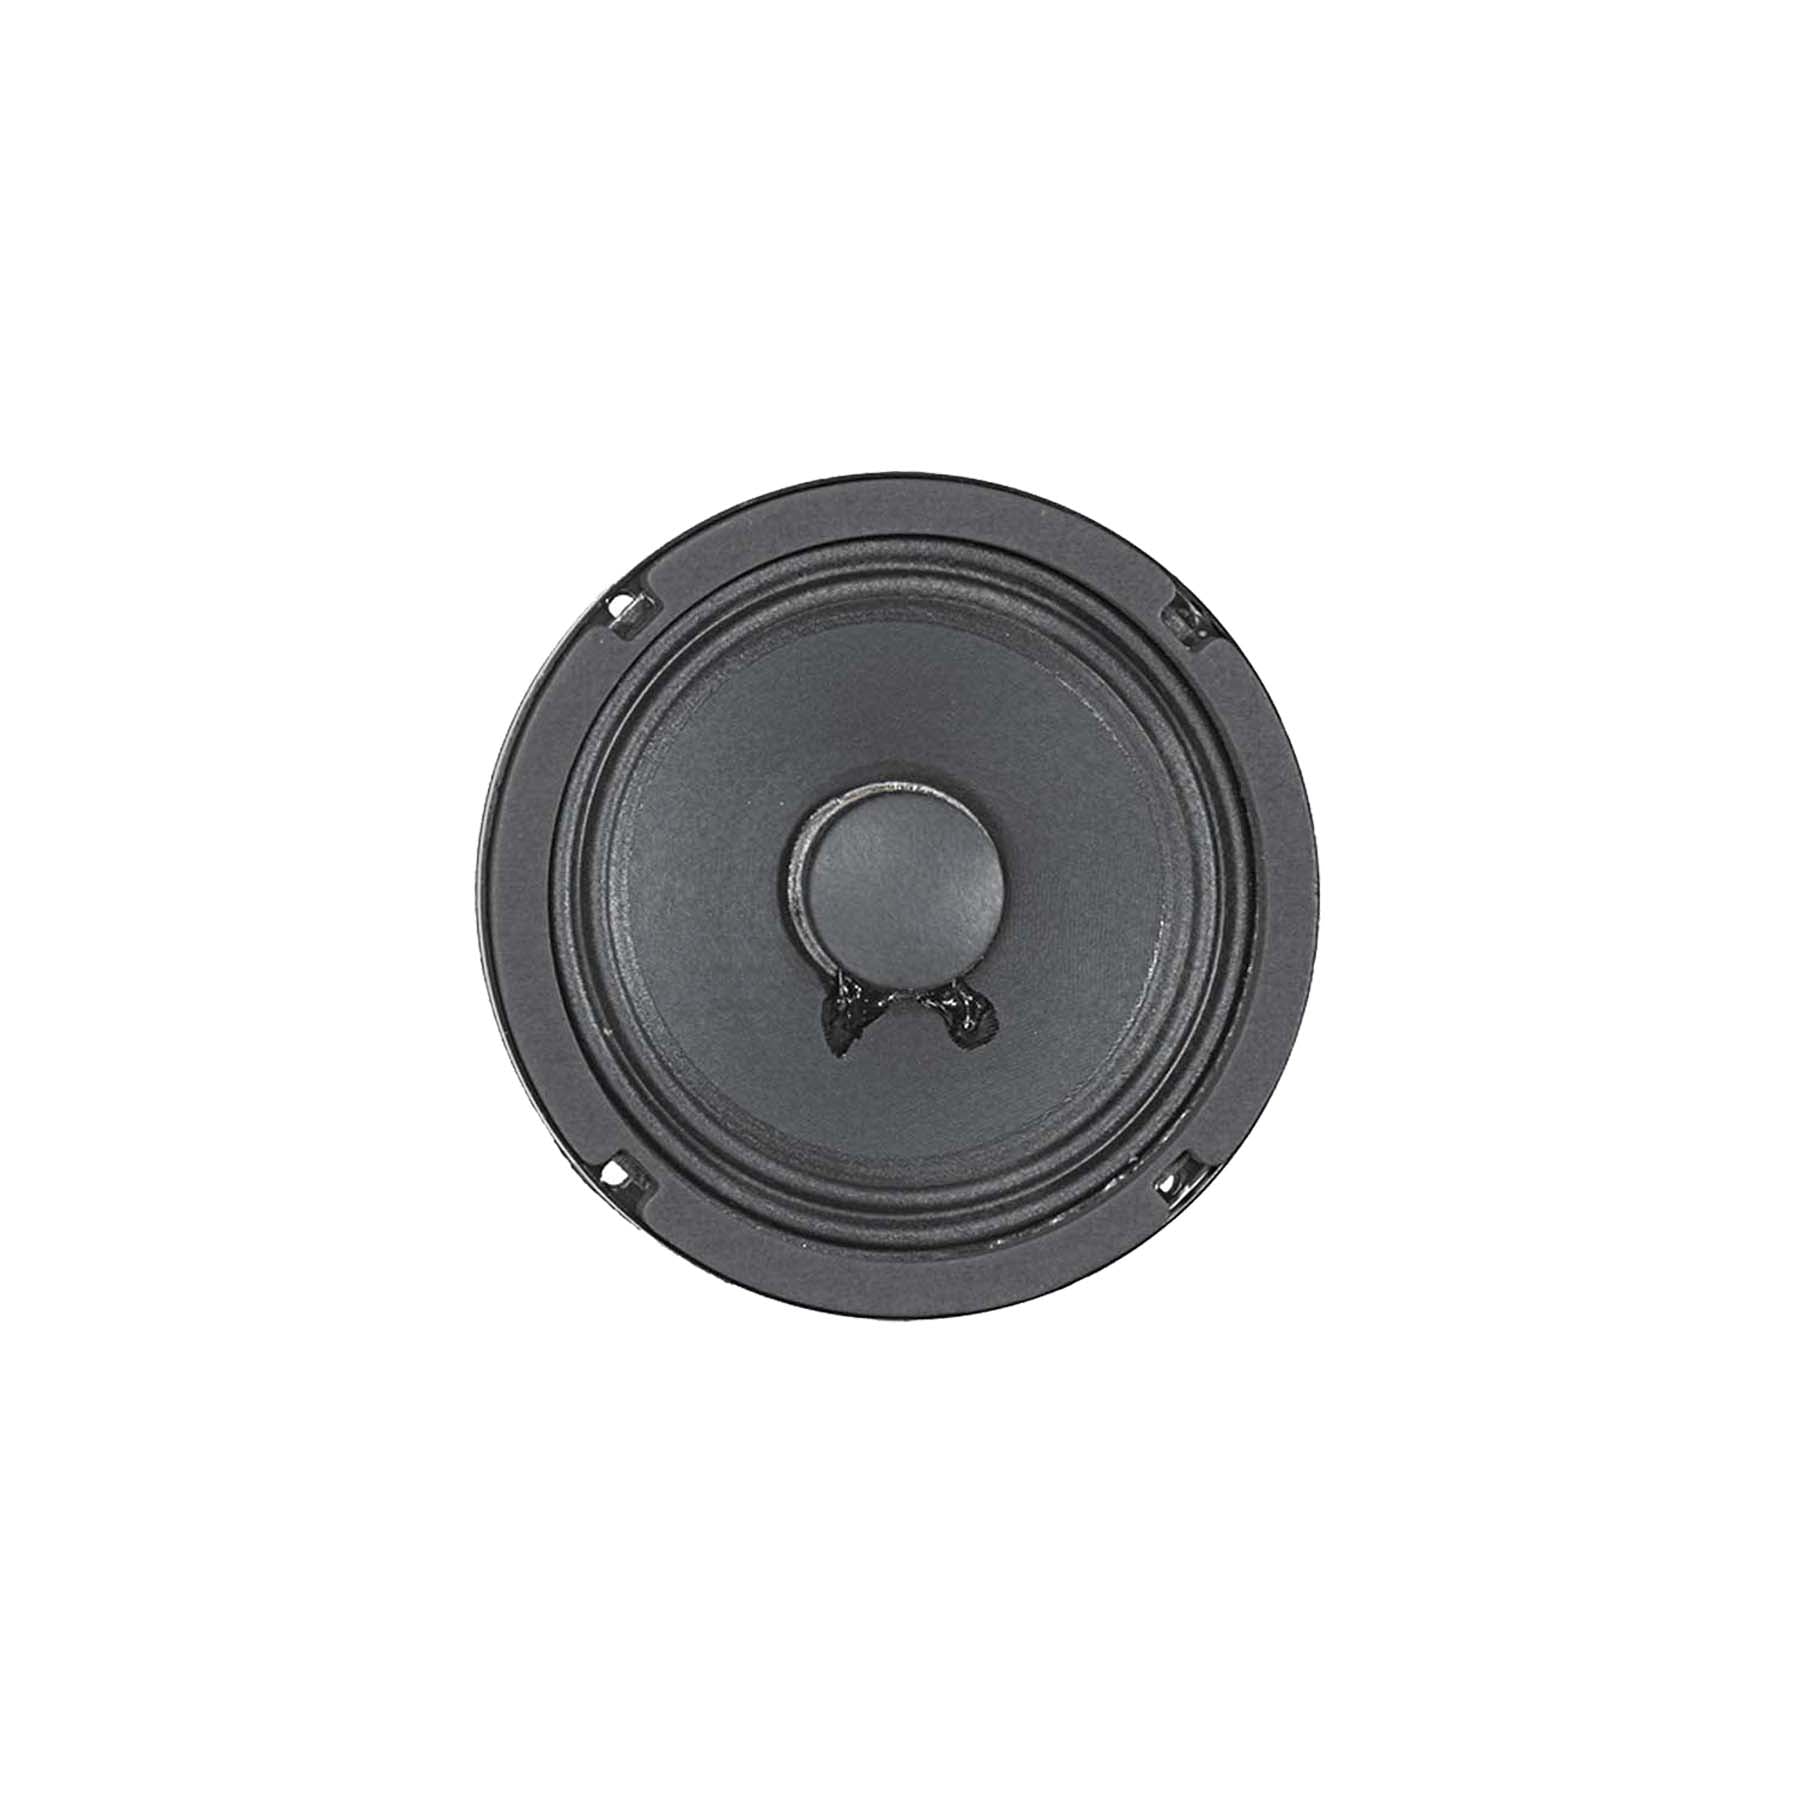 6 inch Eminence American Standard Series Replacement Speaker